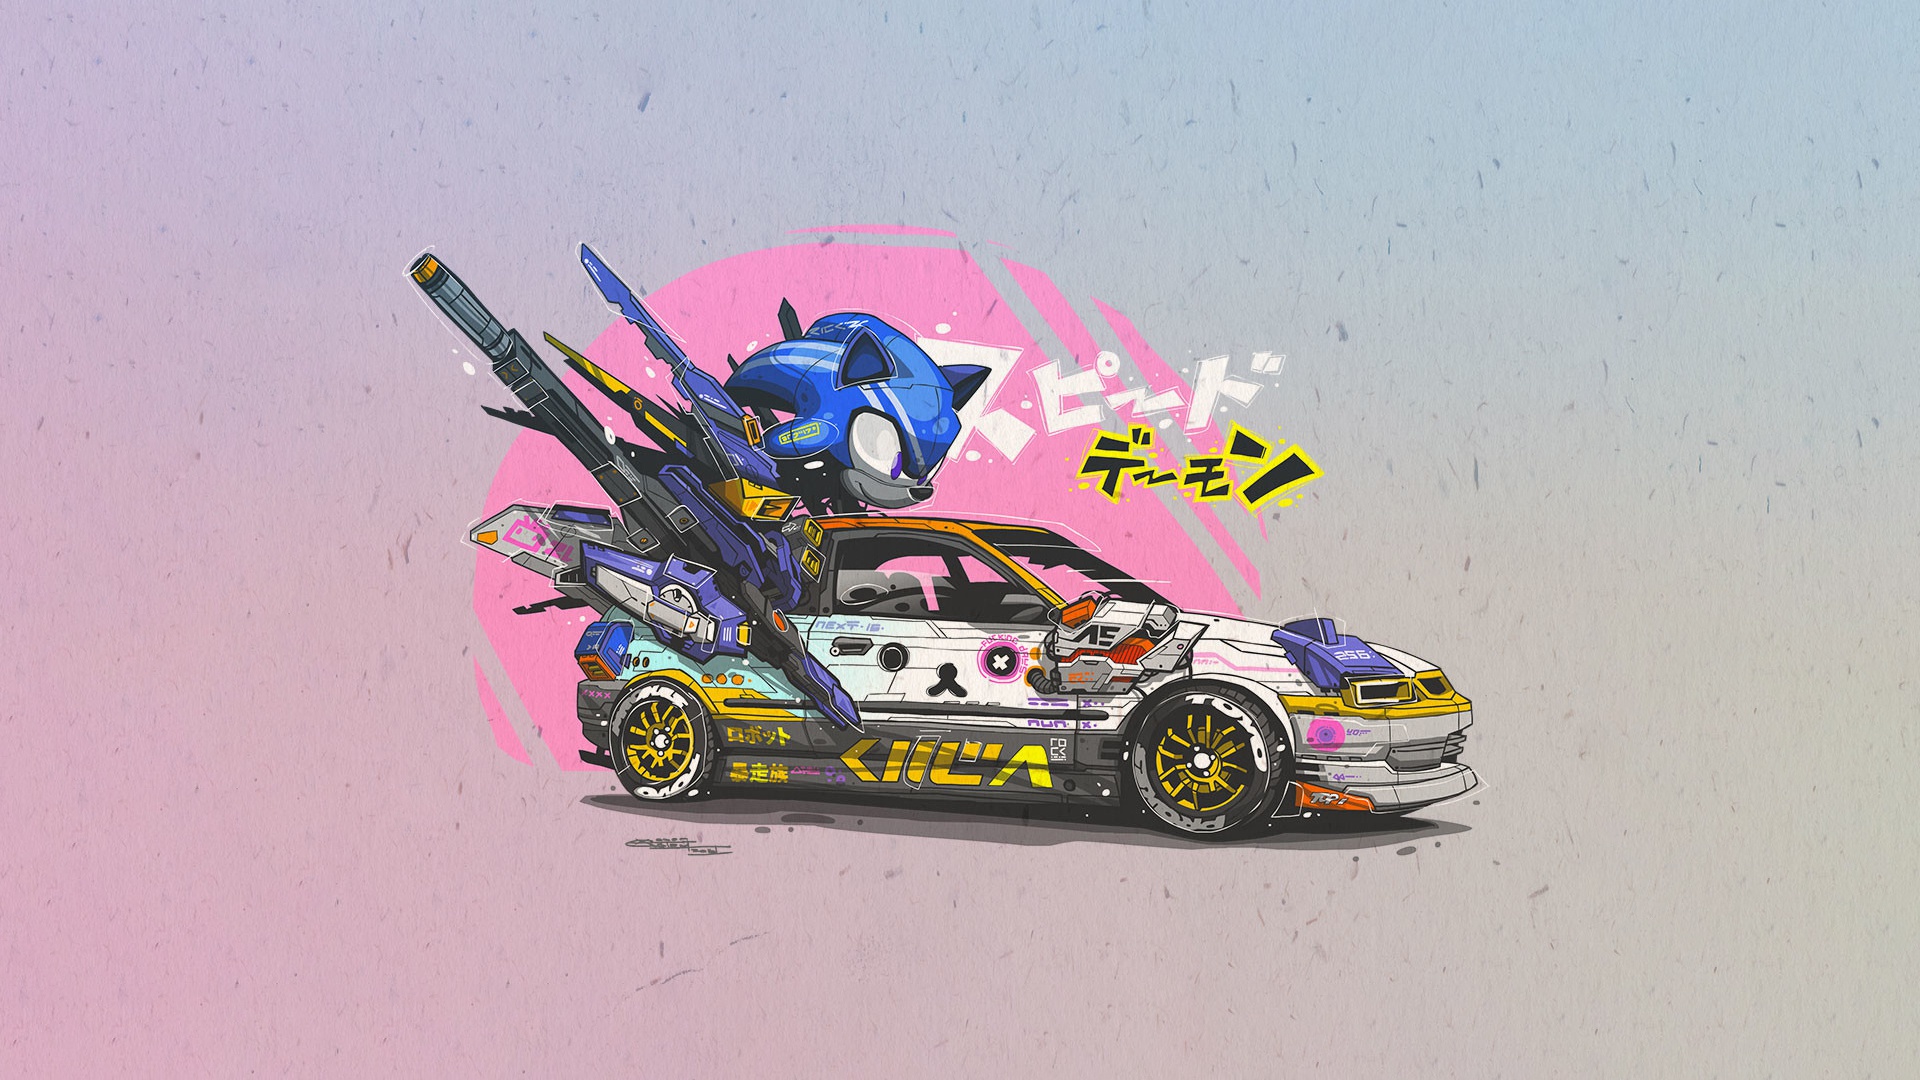 General 1920x1080 Sonic the Hedgehog car vehicle artwork video game characters